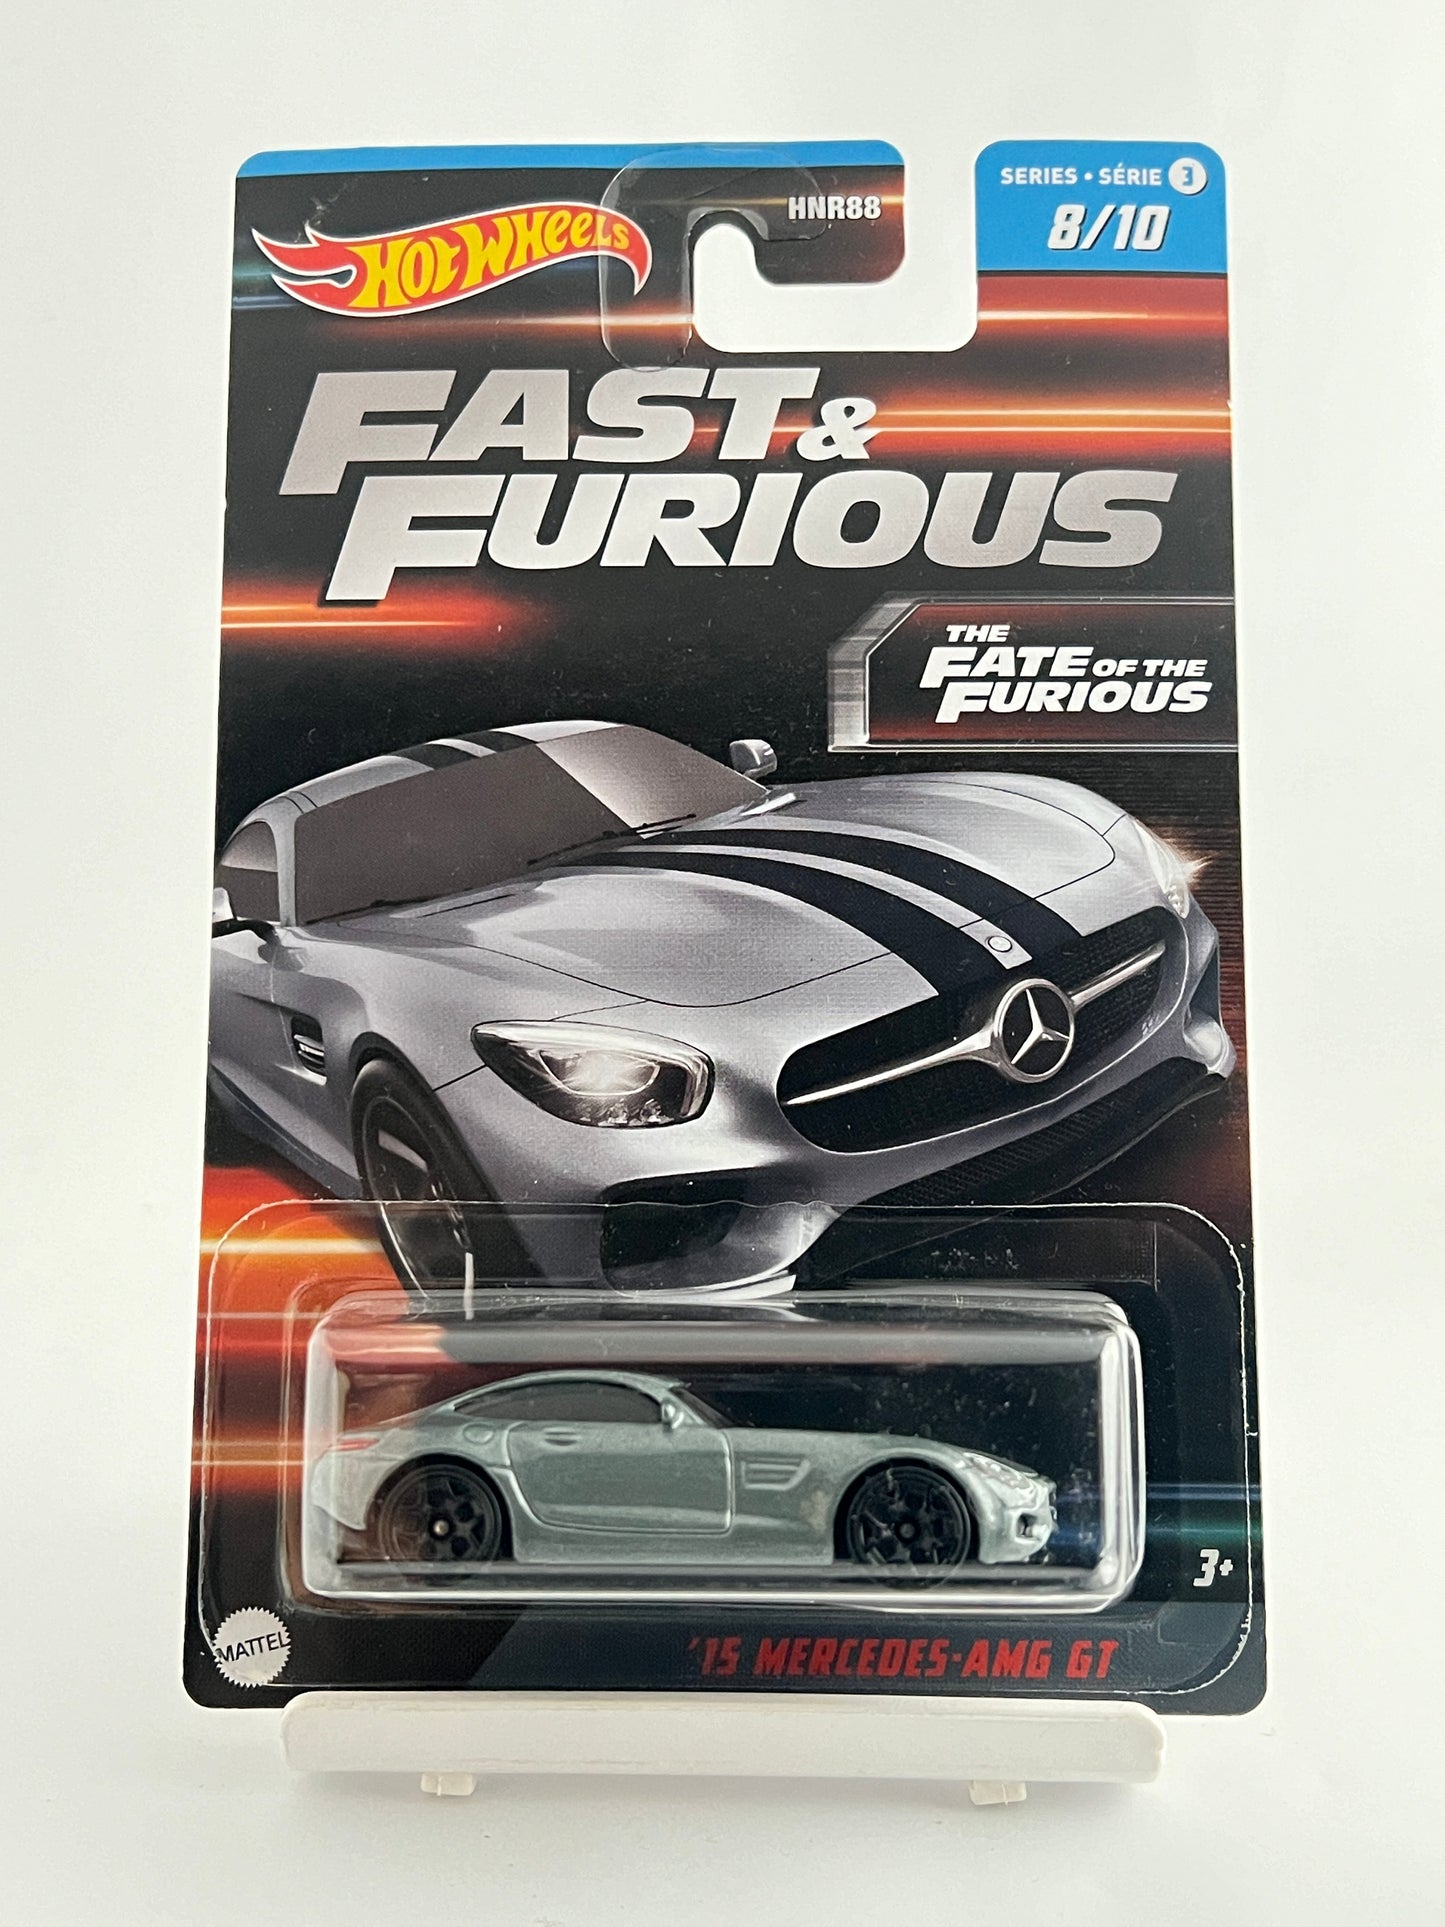 FAST AND FURIOUS - 15 MERCEDES-AMG GT -BLISTER CRACK- 5D